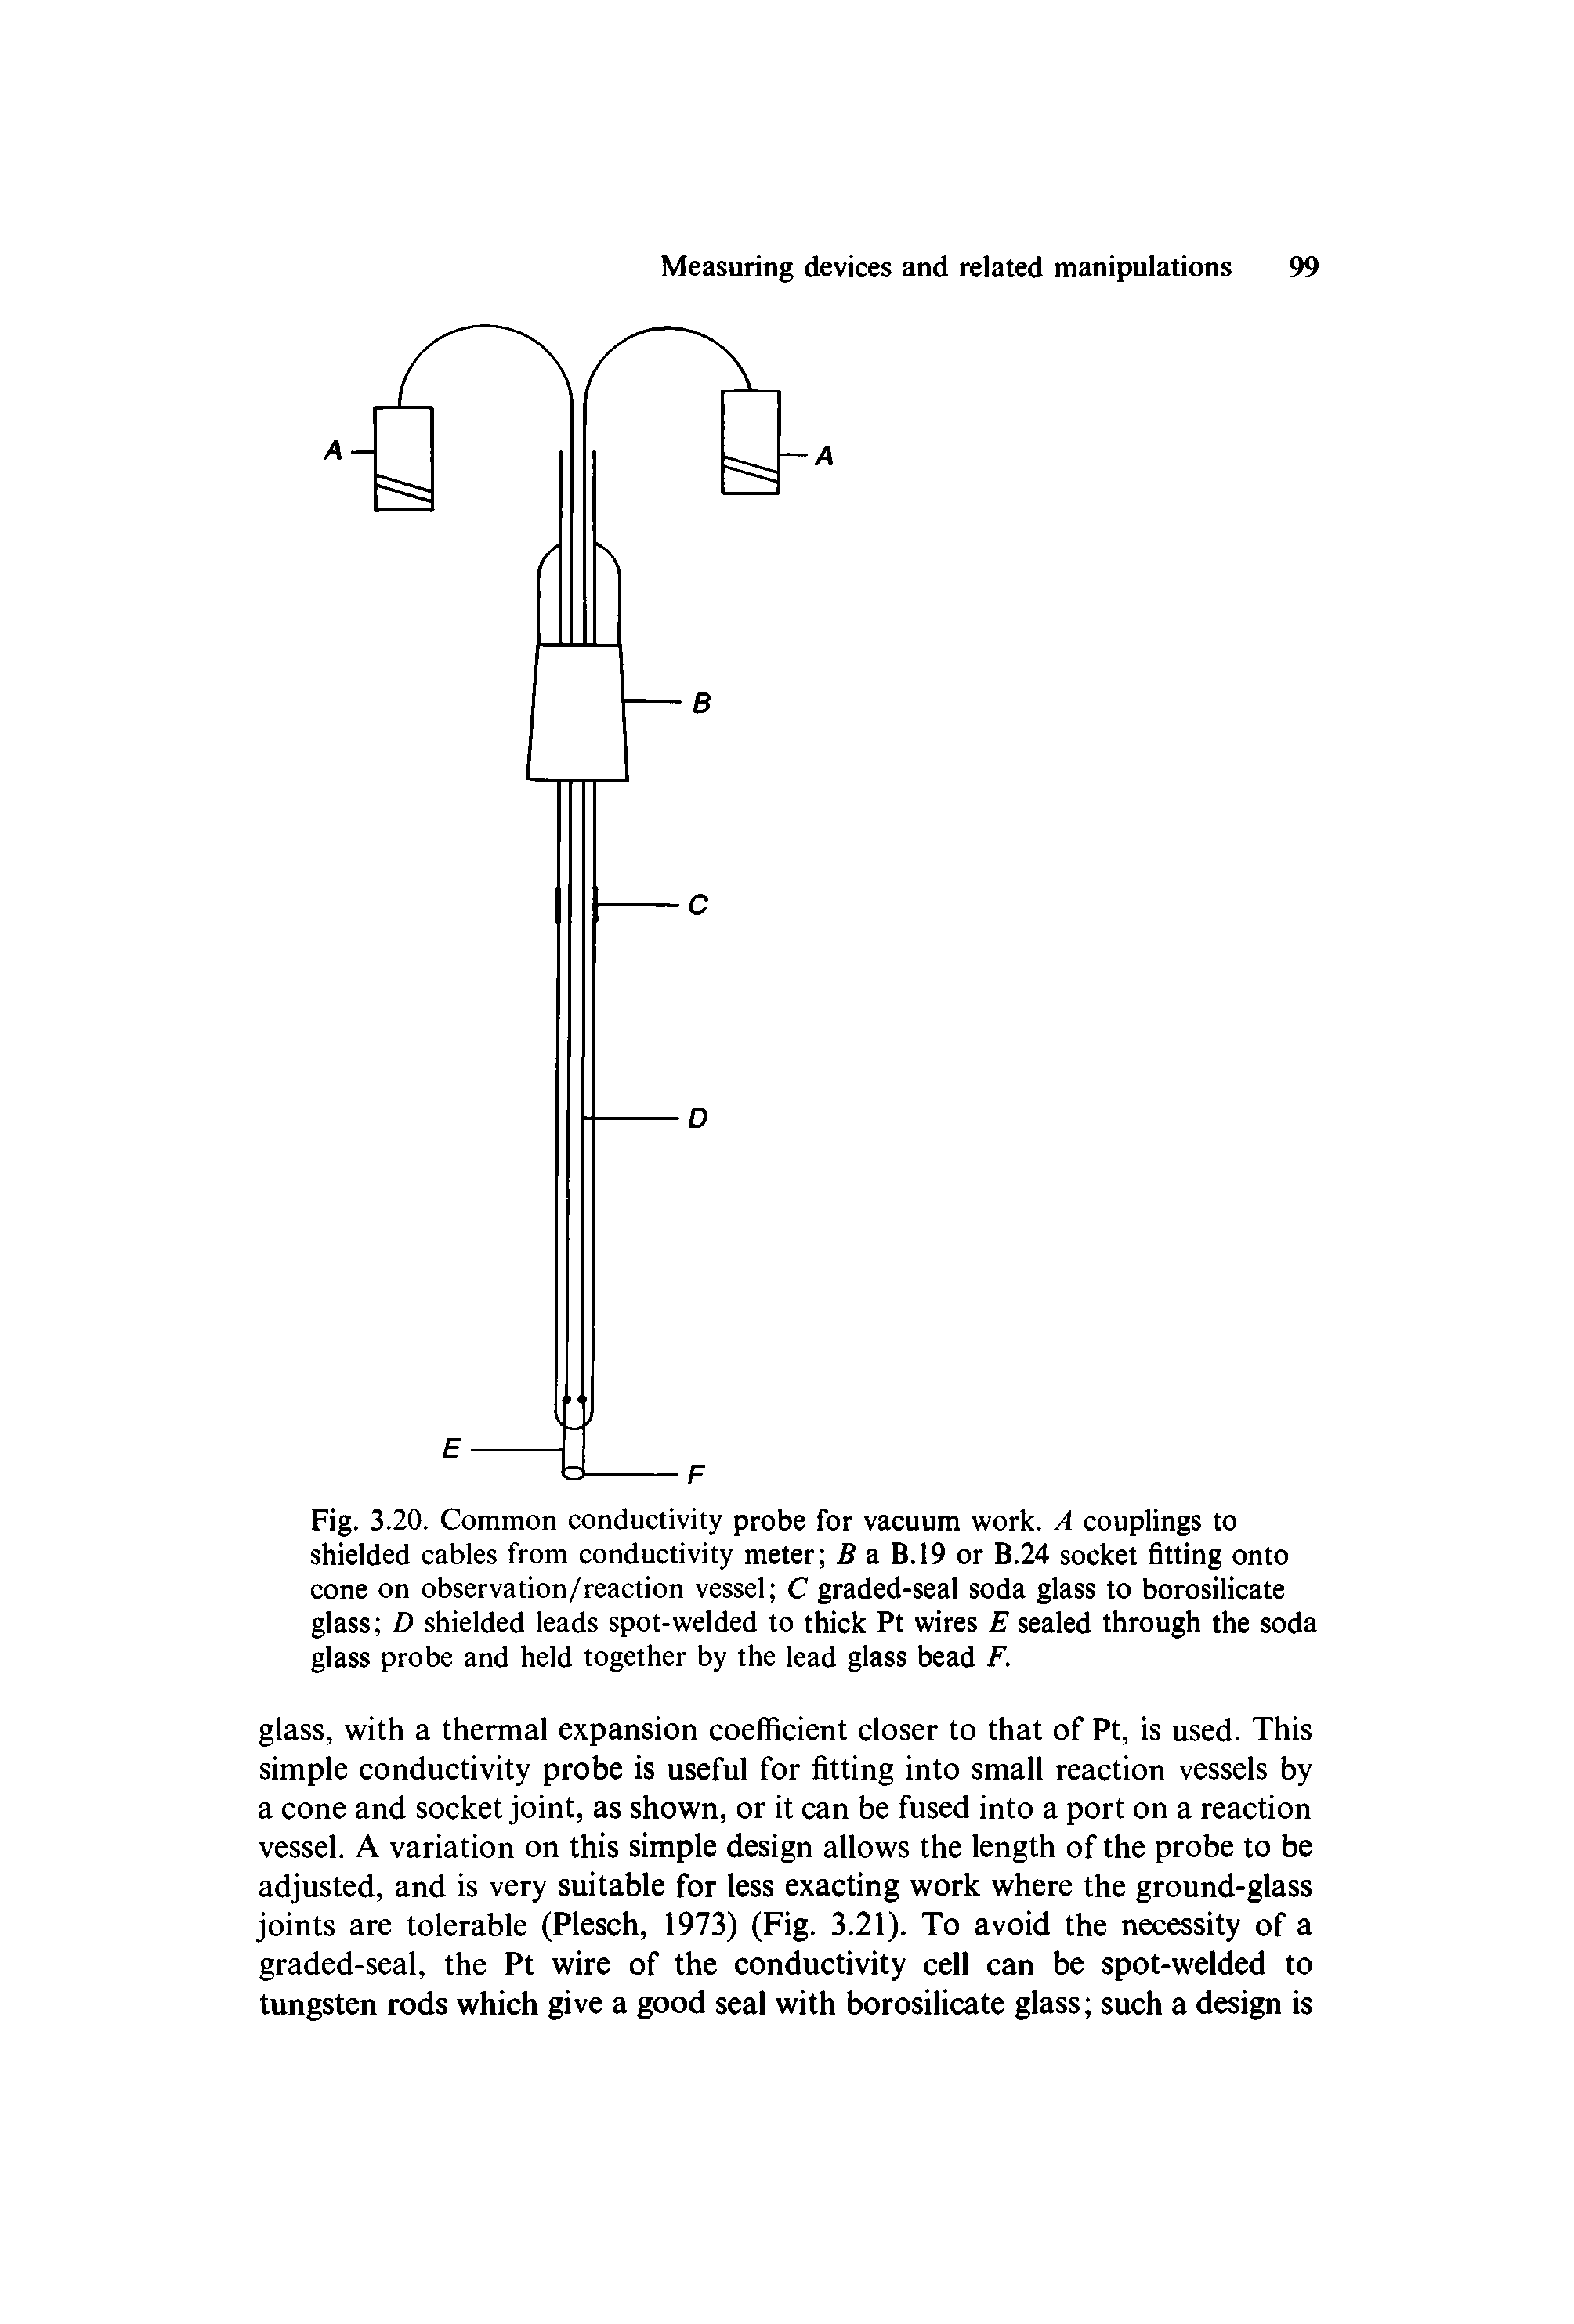 Fig. 3.20. Common conductivity probe for vacuum work. A couplings to shielded cables from conductivity meter 5 a B. 19 or B.24 socket fitting onto cone on observation/reaction vessel C graded-seal soda glass to borosilicate glass D shielded leads spot-welded to thick Pt wires E sealed through the soda glass probe and held together by the lead glass bead F.